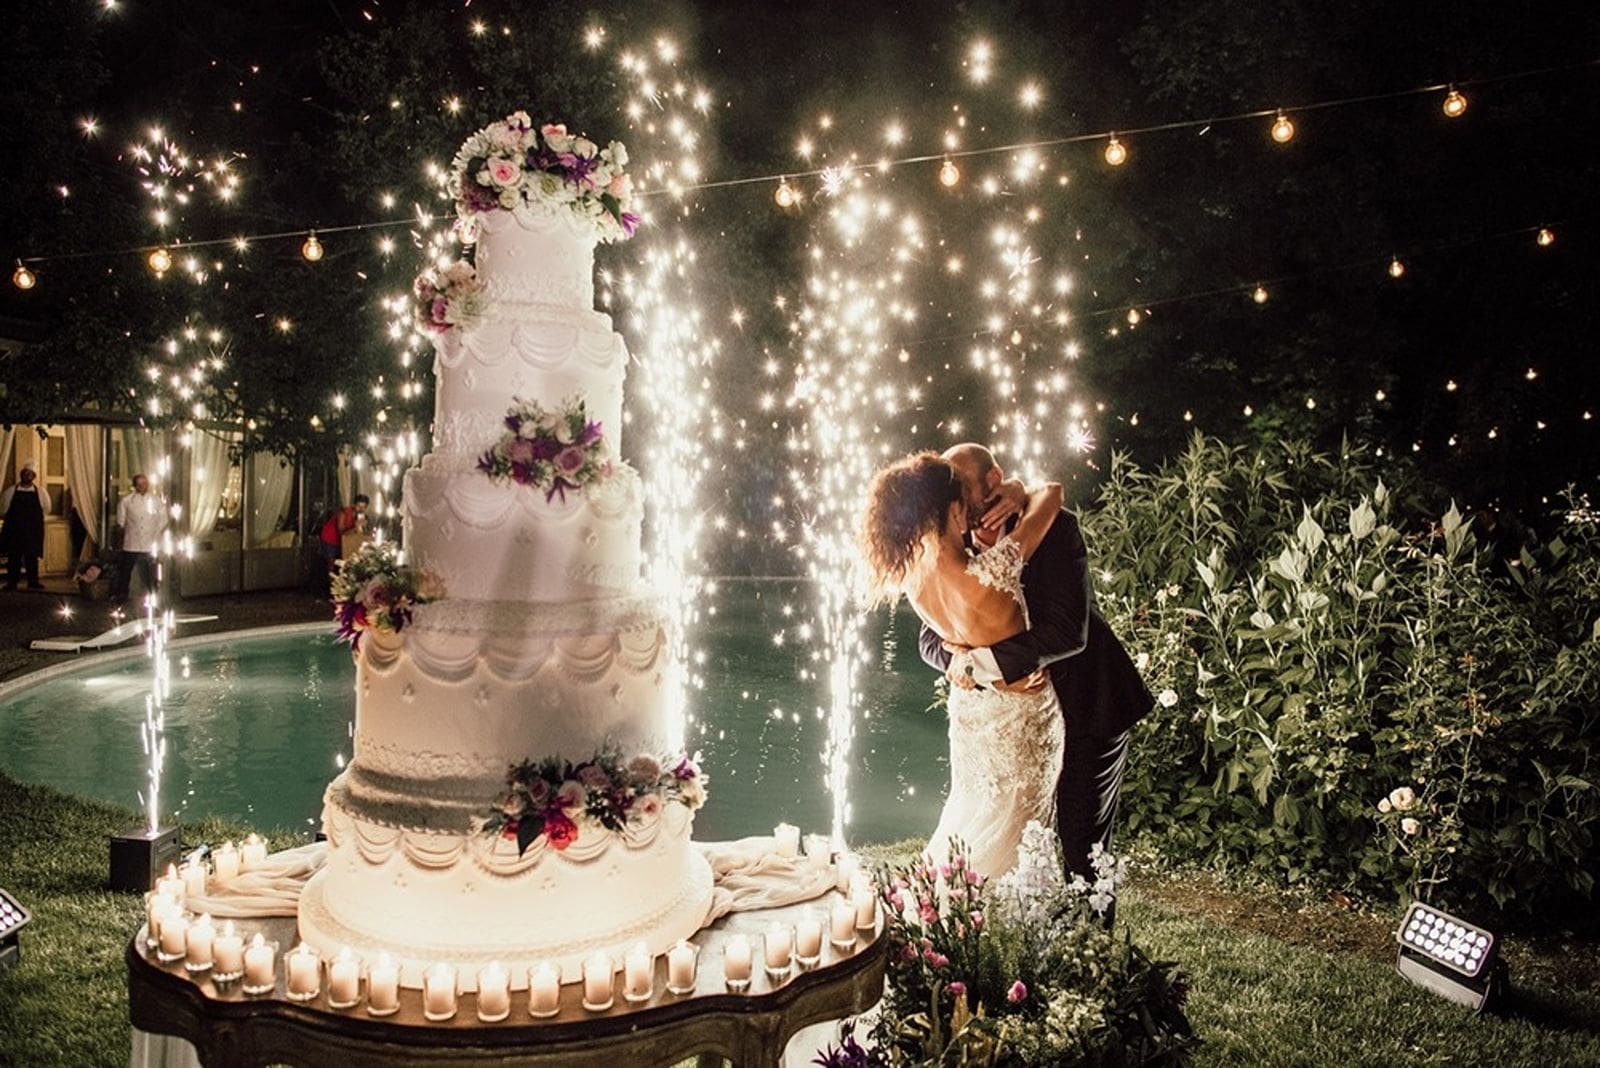 Bride and groom kiss after cutting into wedding cake with fireworks in background